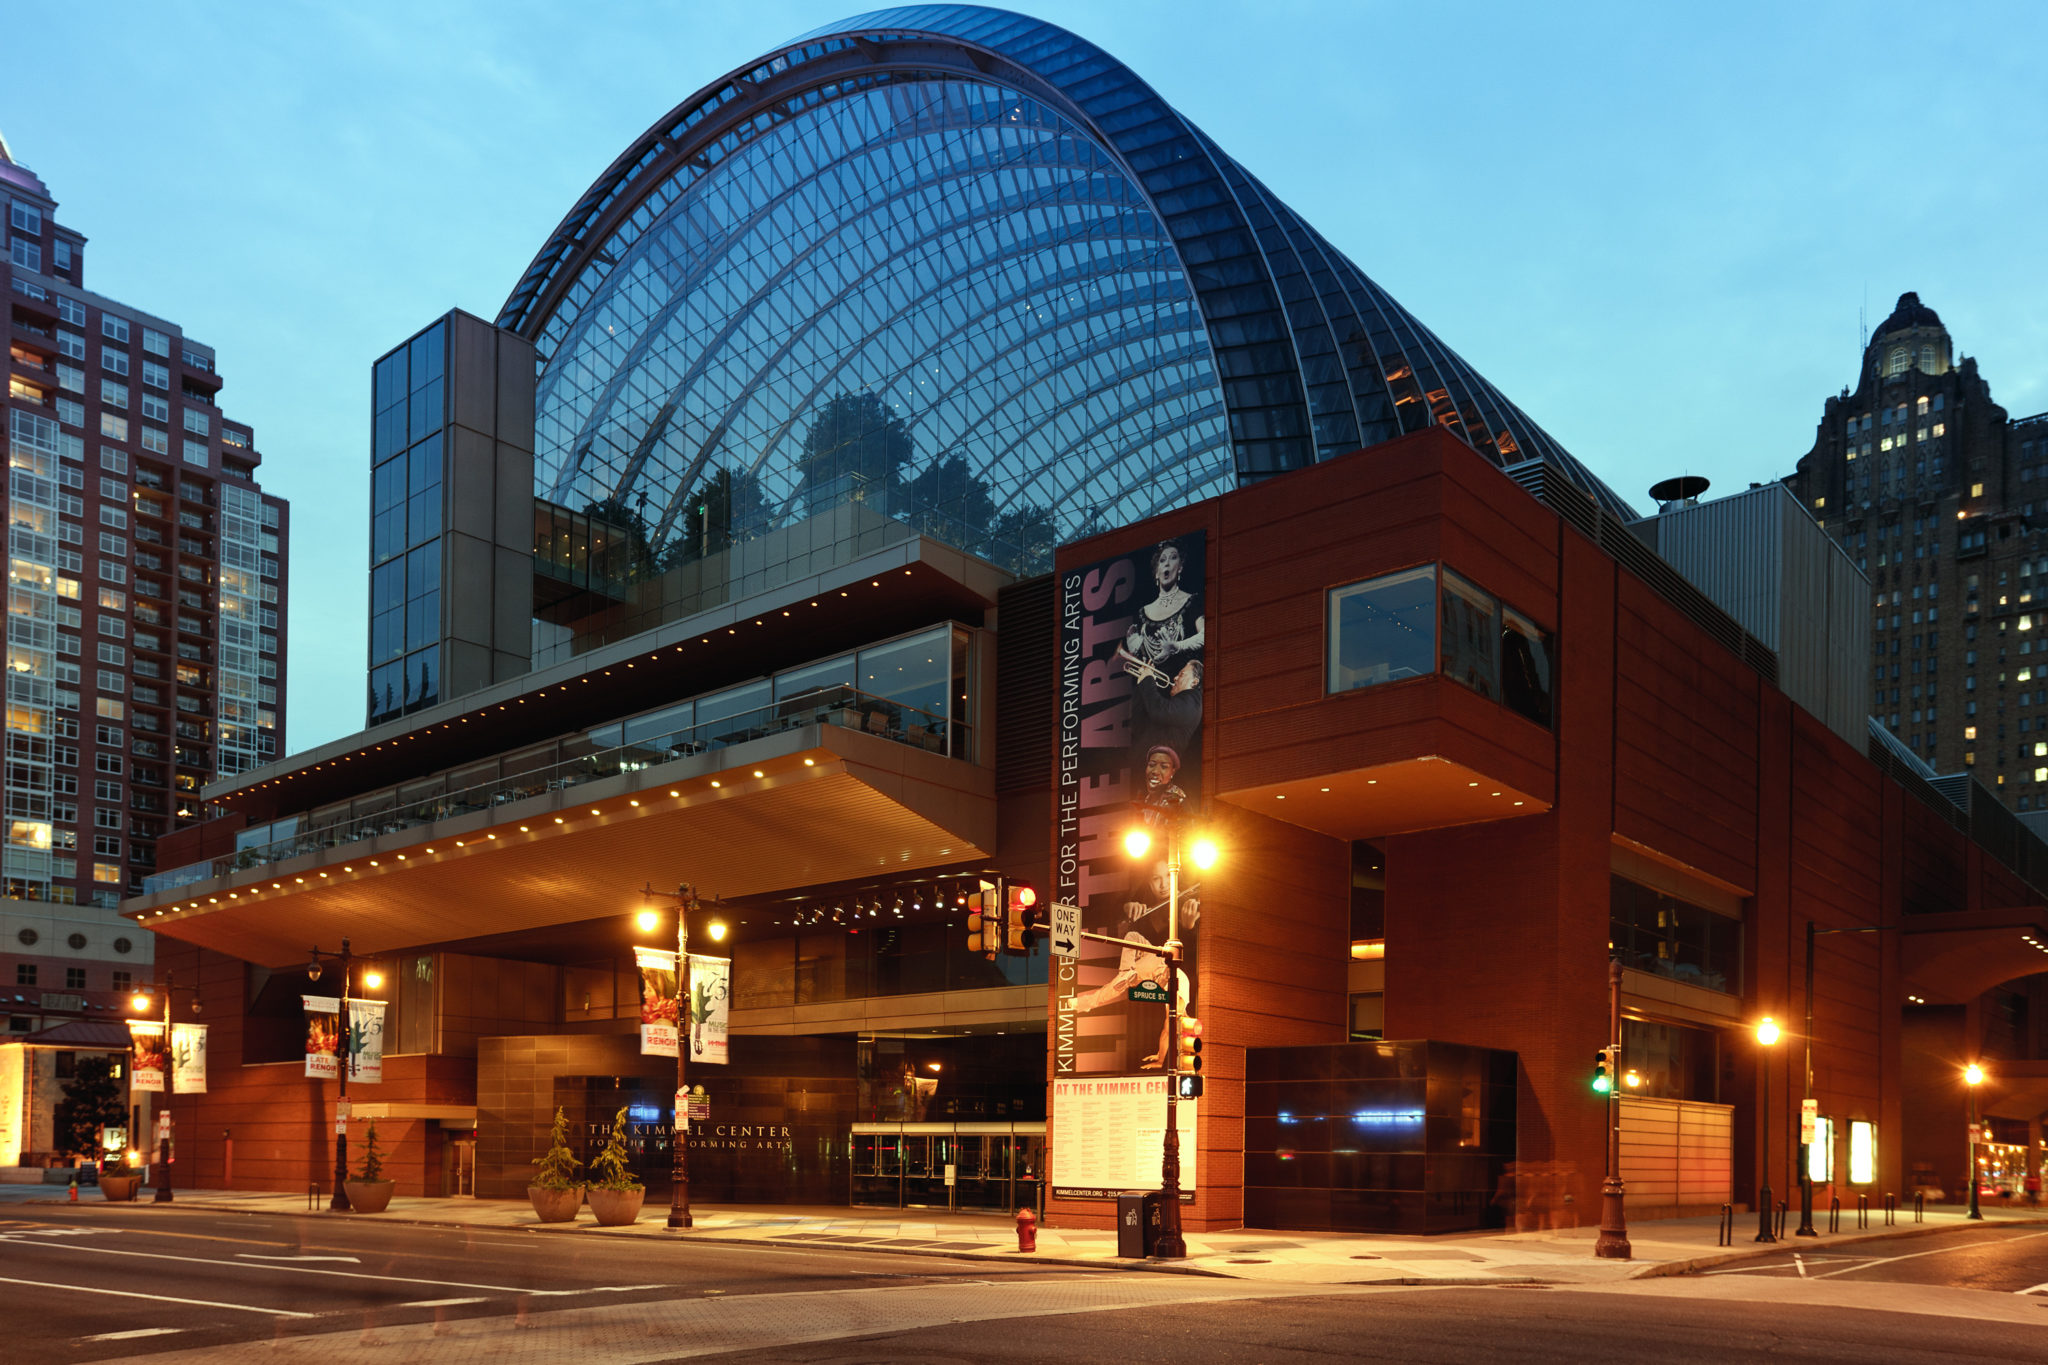 Kimmel Center for the Performing Arts photo by Paul Loftland for PHLCVB